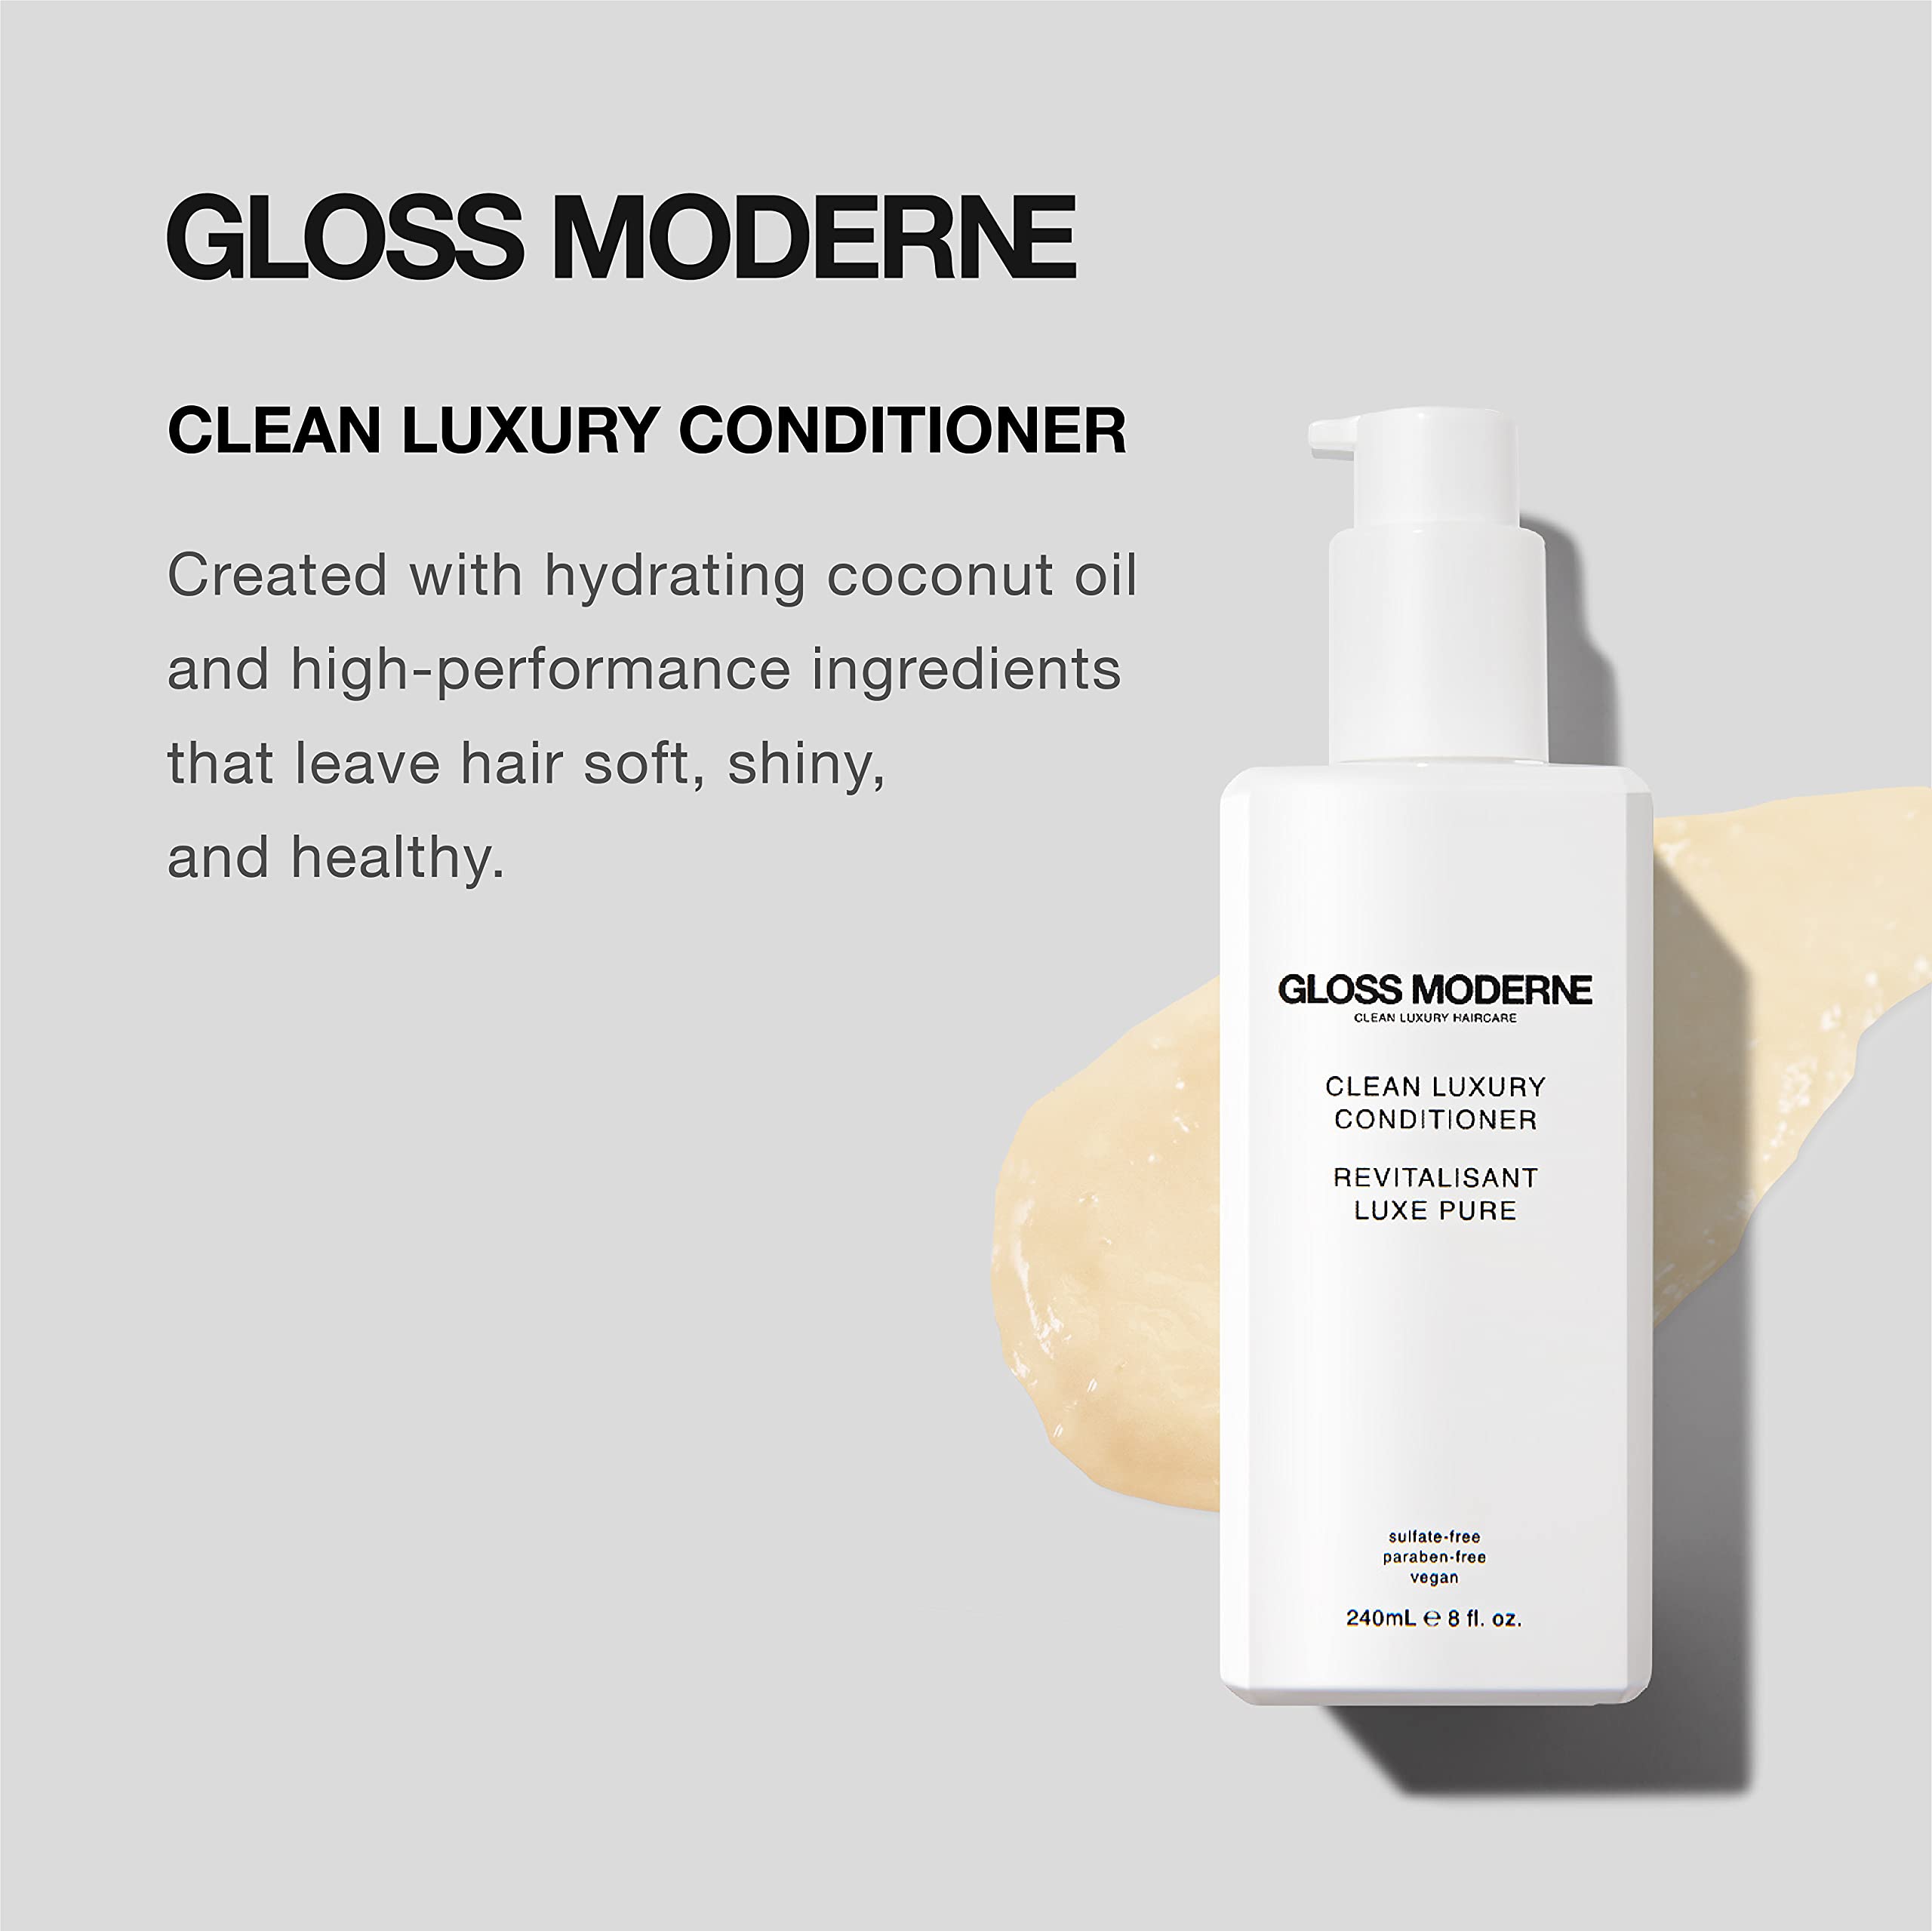 Clean Luxury Hair Conditioner by GLOSS MODERNE - 8 Fl Oz - Treatment for Damaged and Dry Hair with Notes of Mediterranean Almond and Coconut Accented with Cognac - For Soft and Shiny Hair